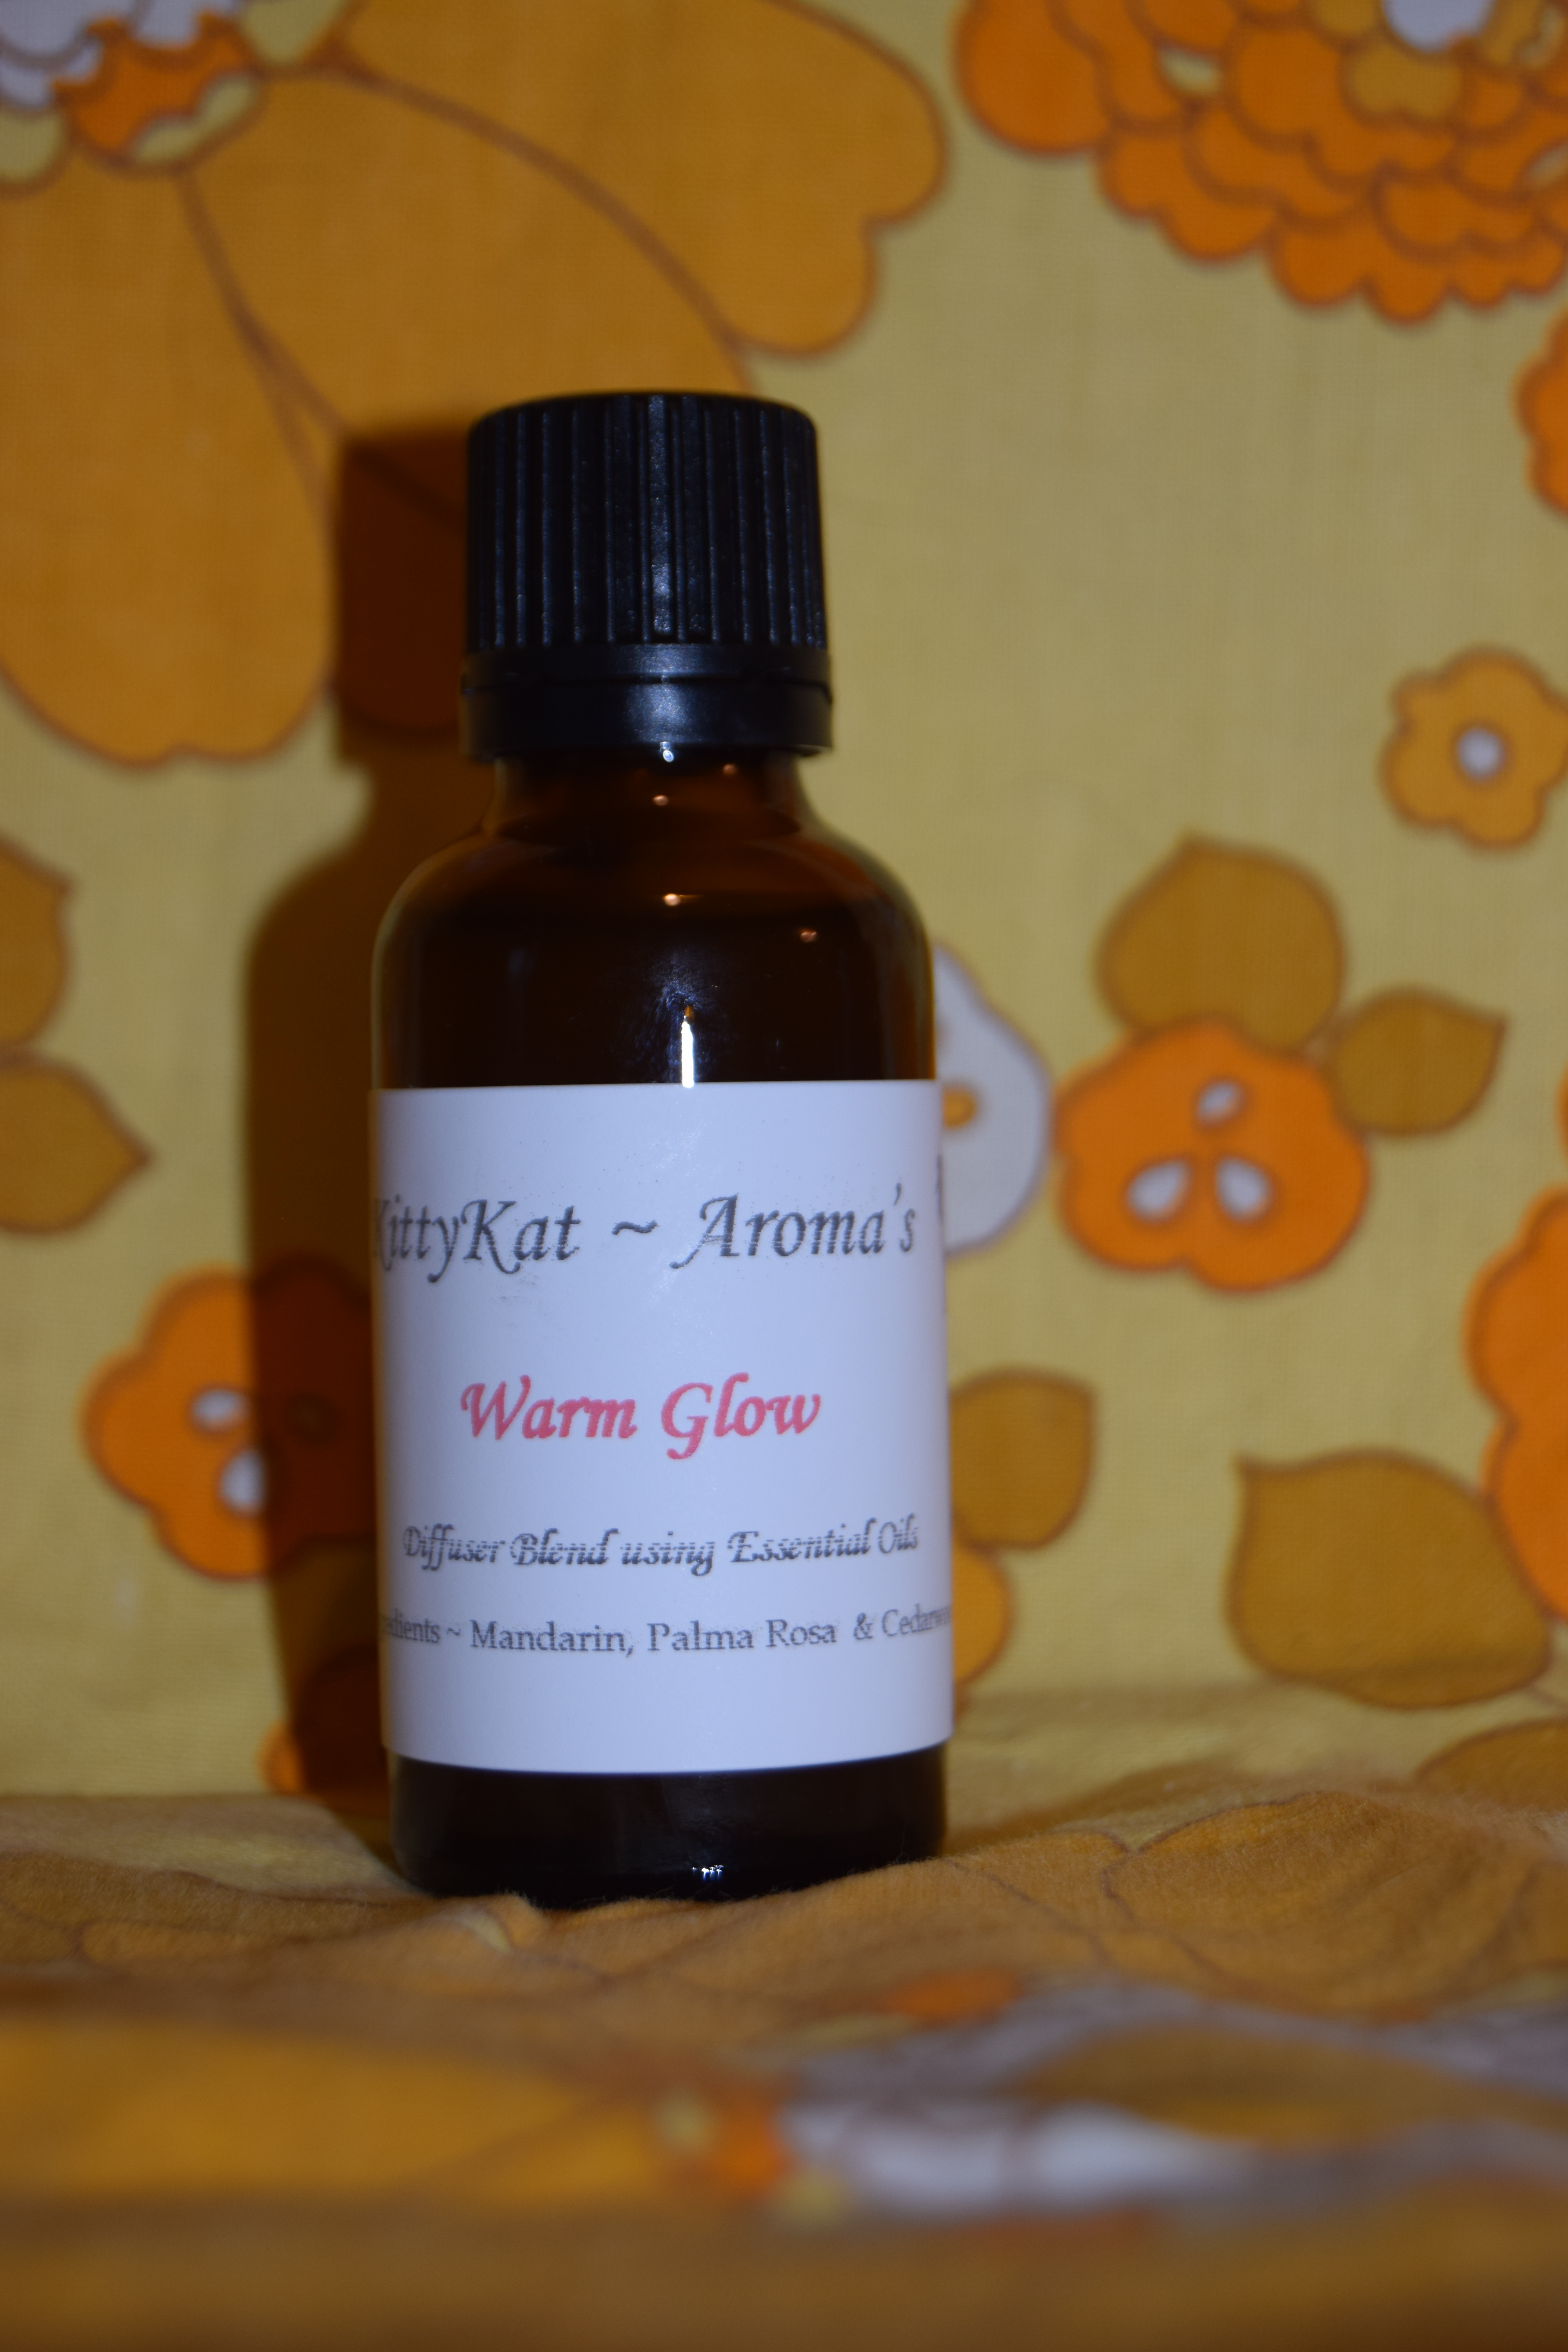 Warm Glow Essemtial Oil DiffuserBlend